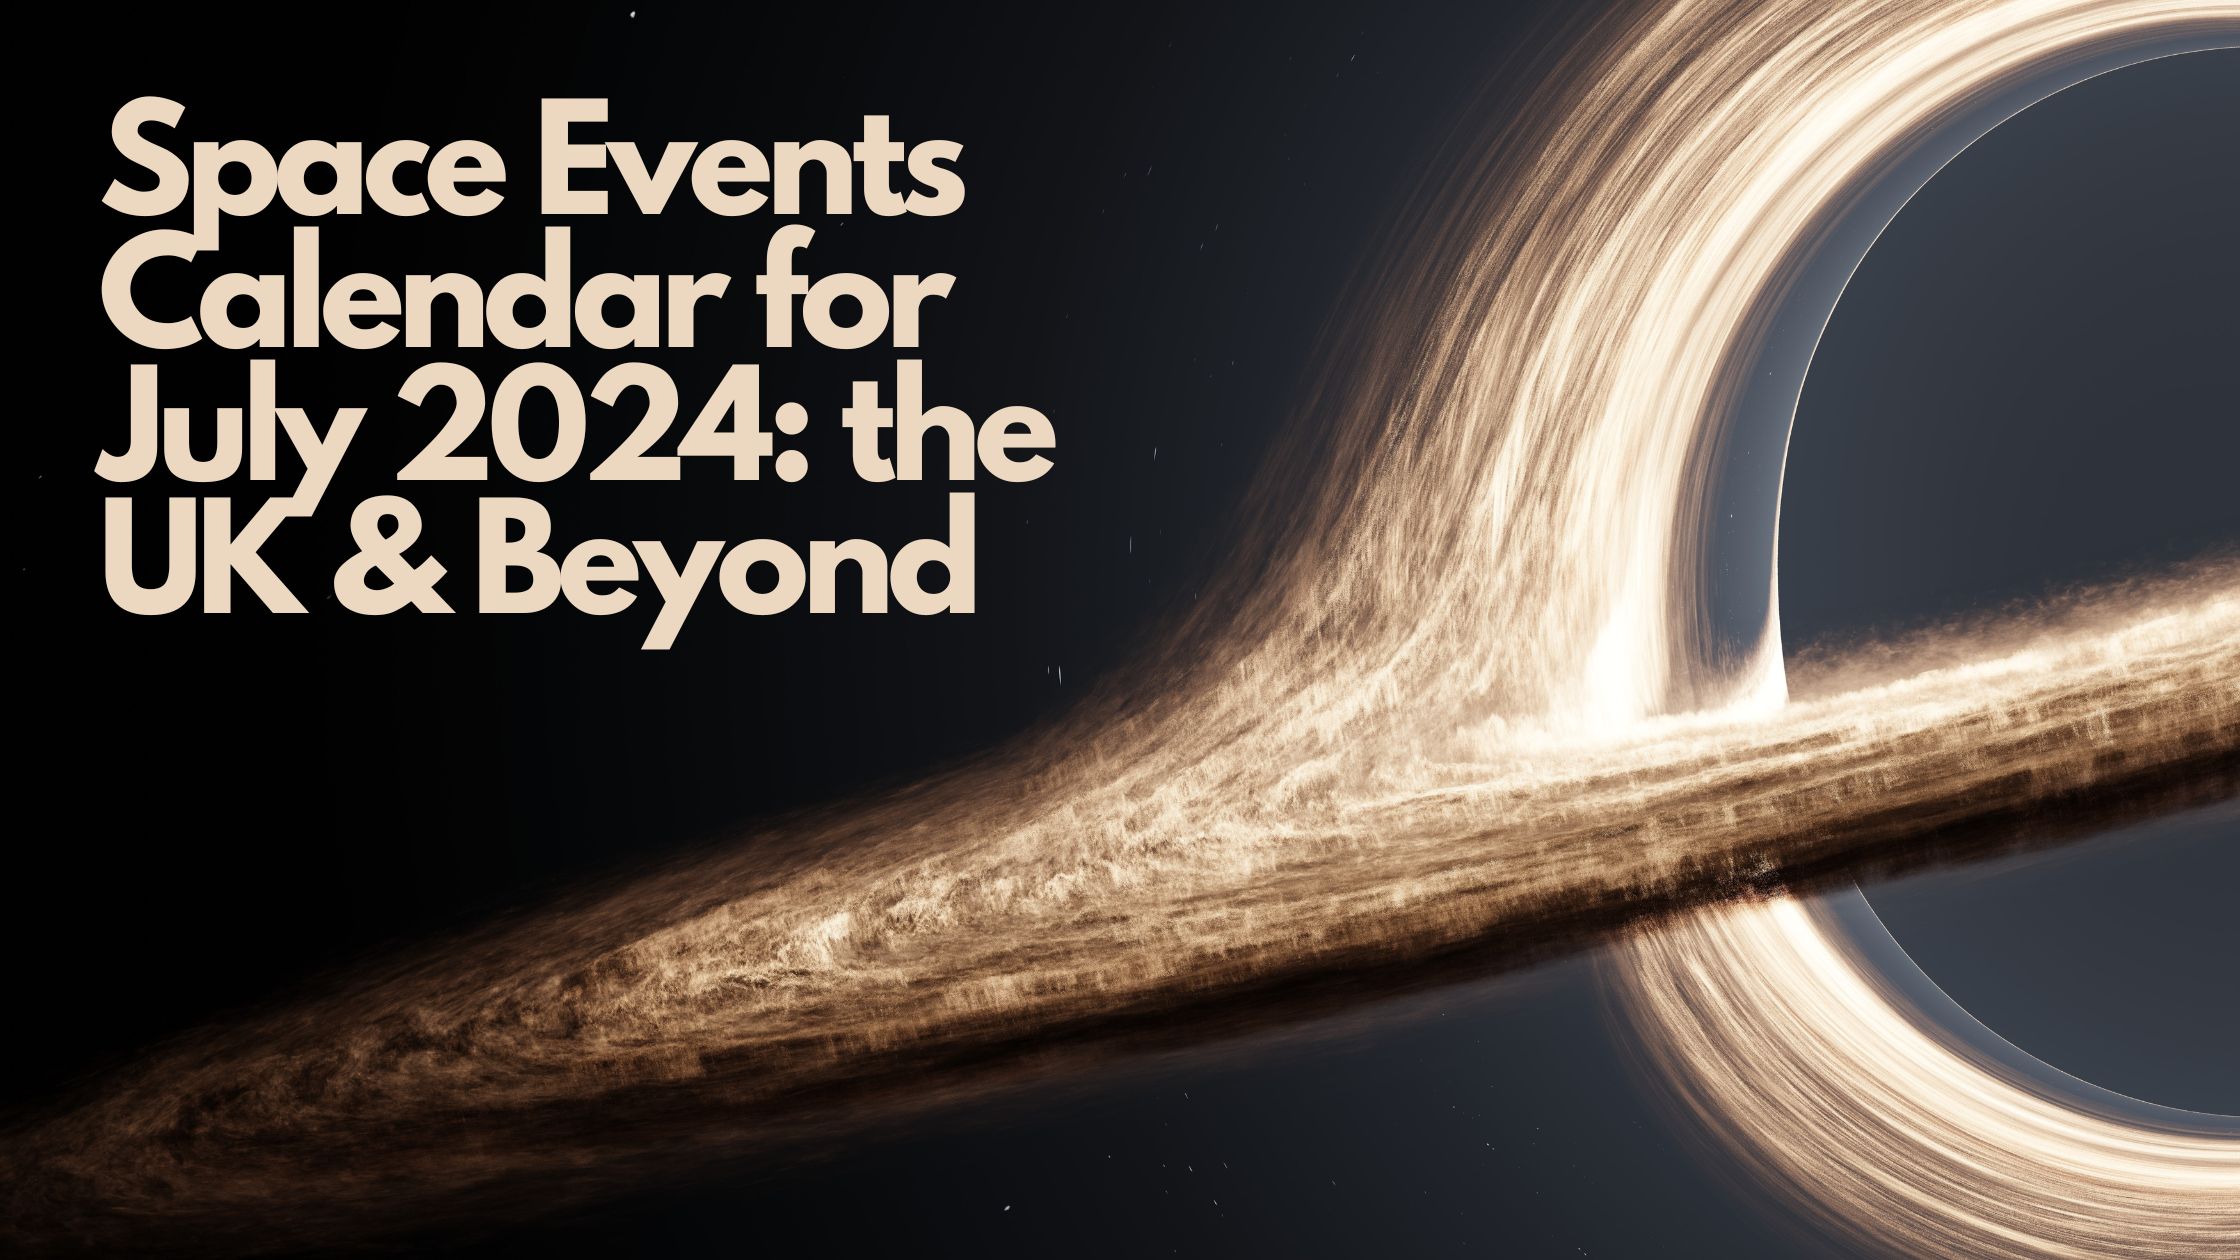 Space Events Calendar for July 2024: the UK & Beyond